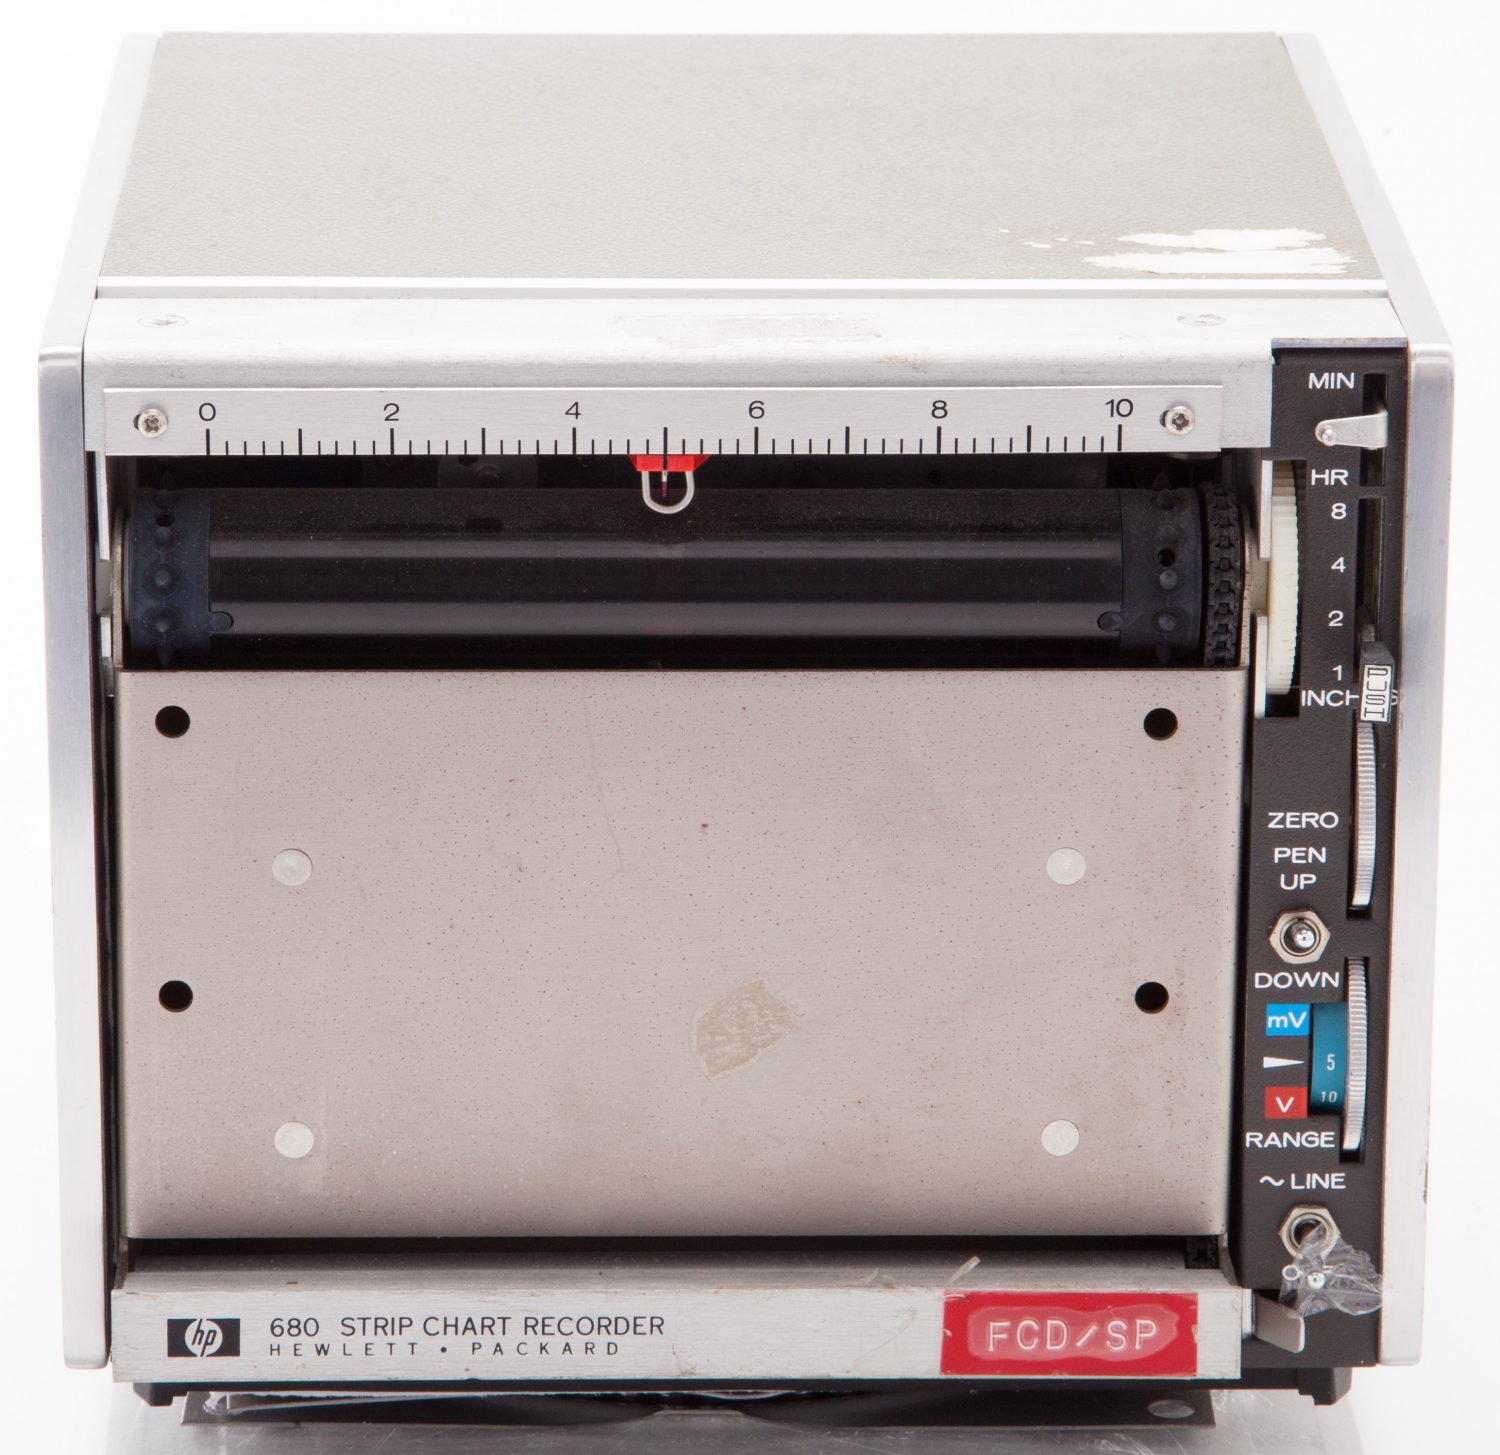 Front of the HP 680 Strip Chart Recorder.